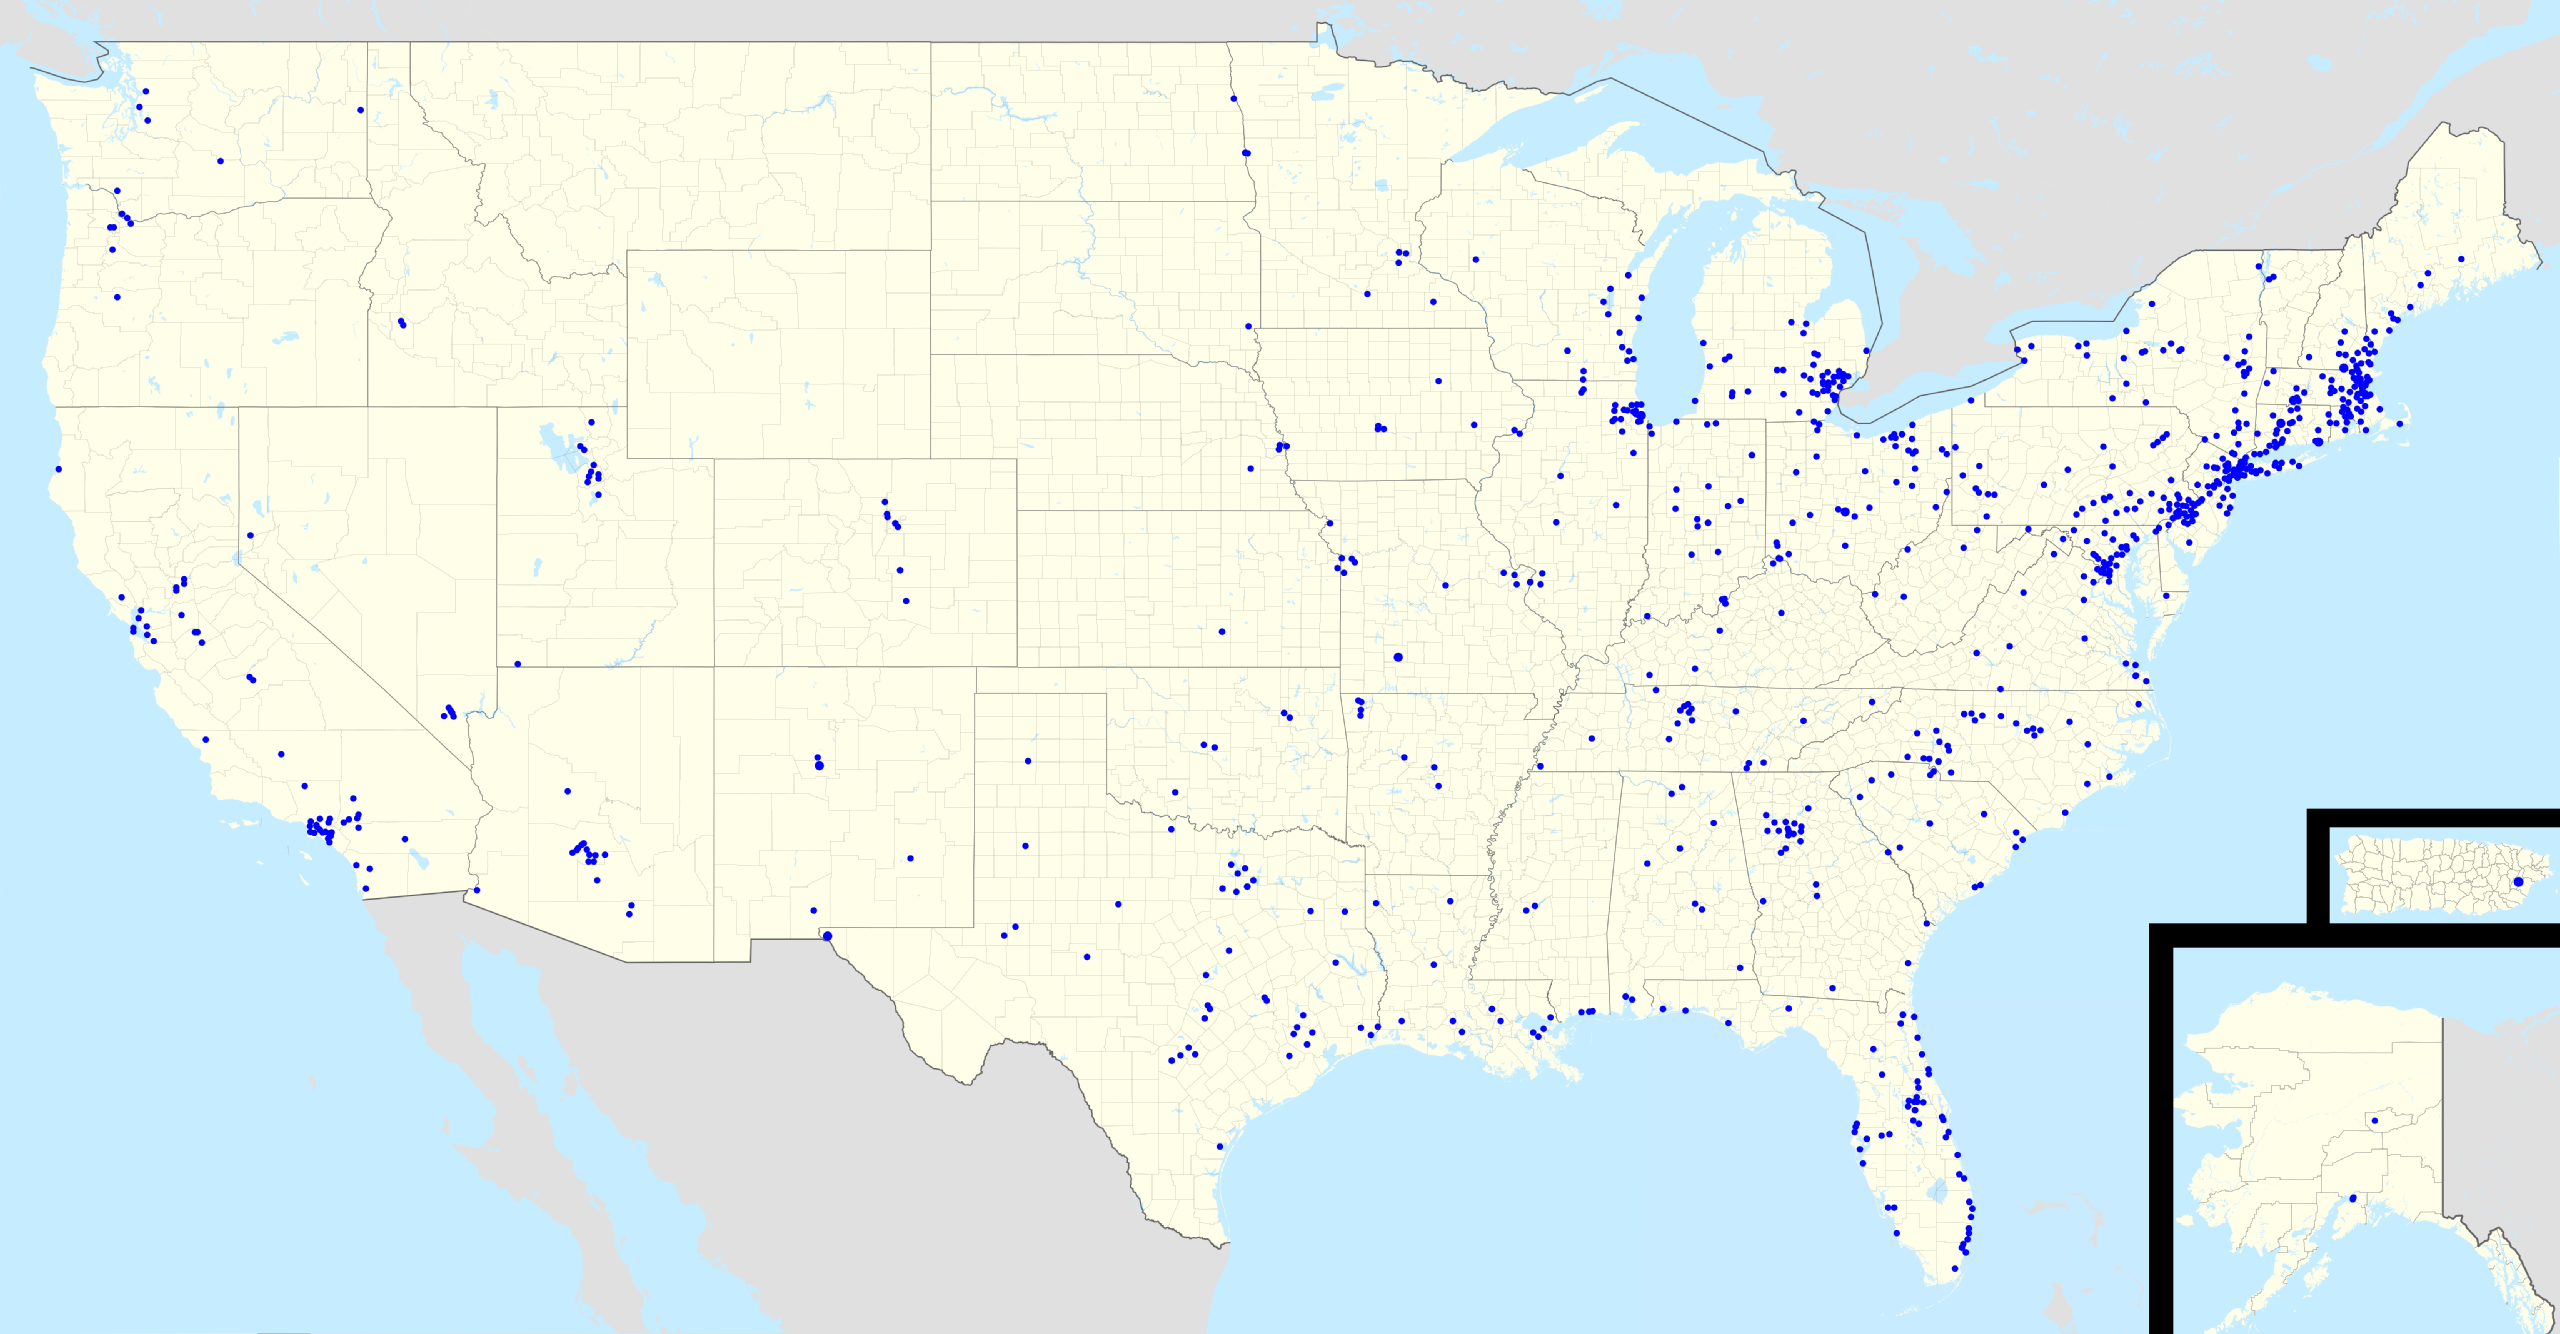 File:Planet Fitness locations in the US.png - Wikipedia